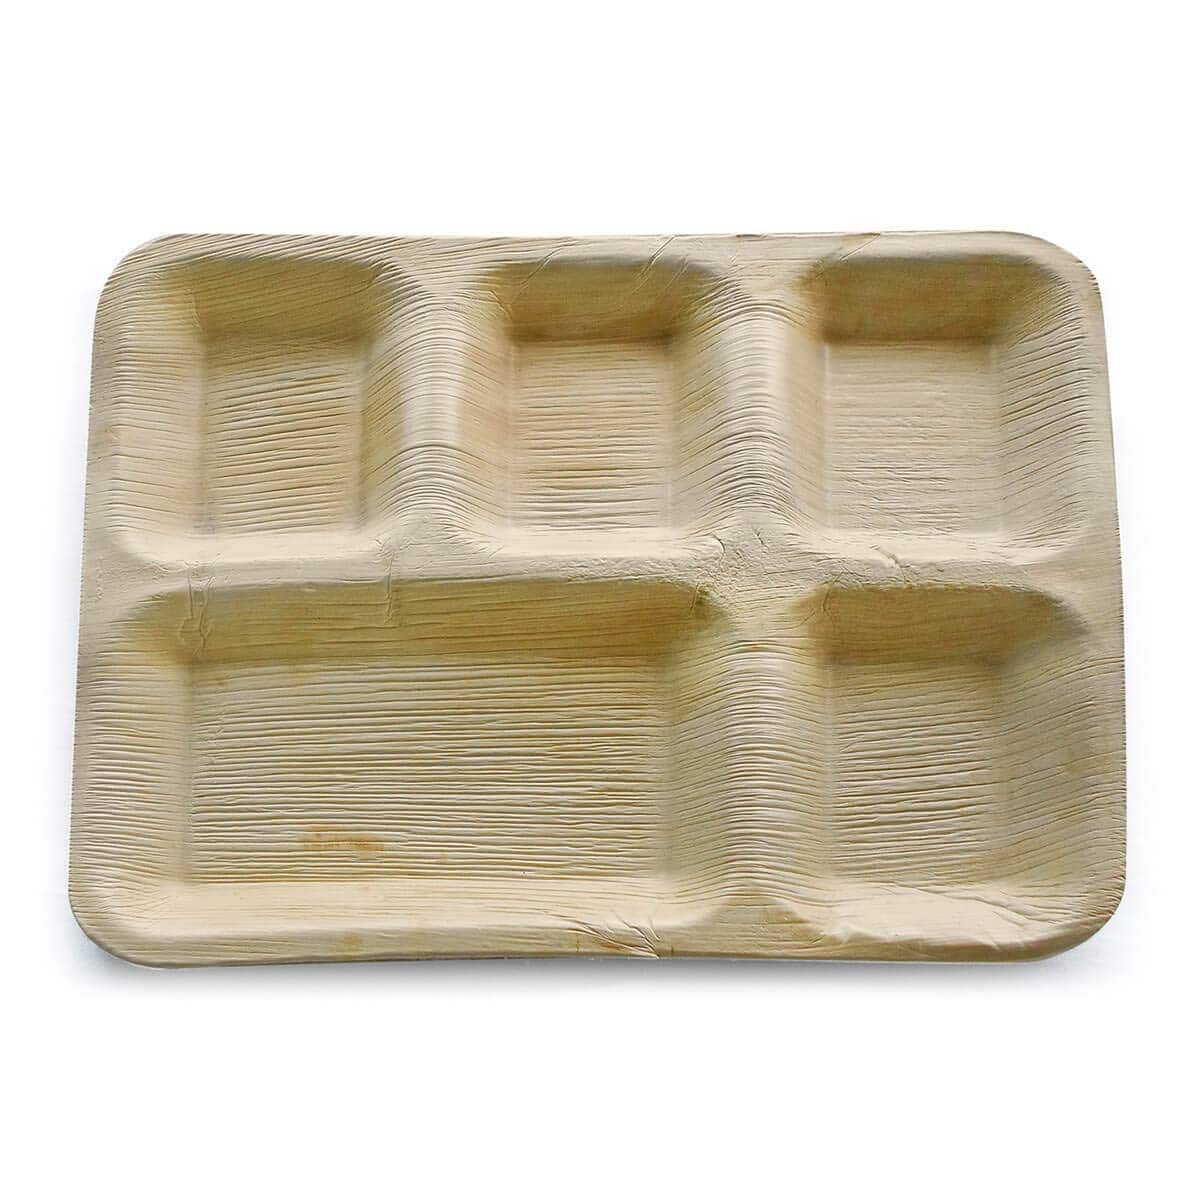 Areca Leaves 12 x 10 Inches 5 Partition Disposal Plates( Pack of 25)